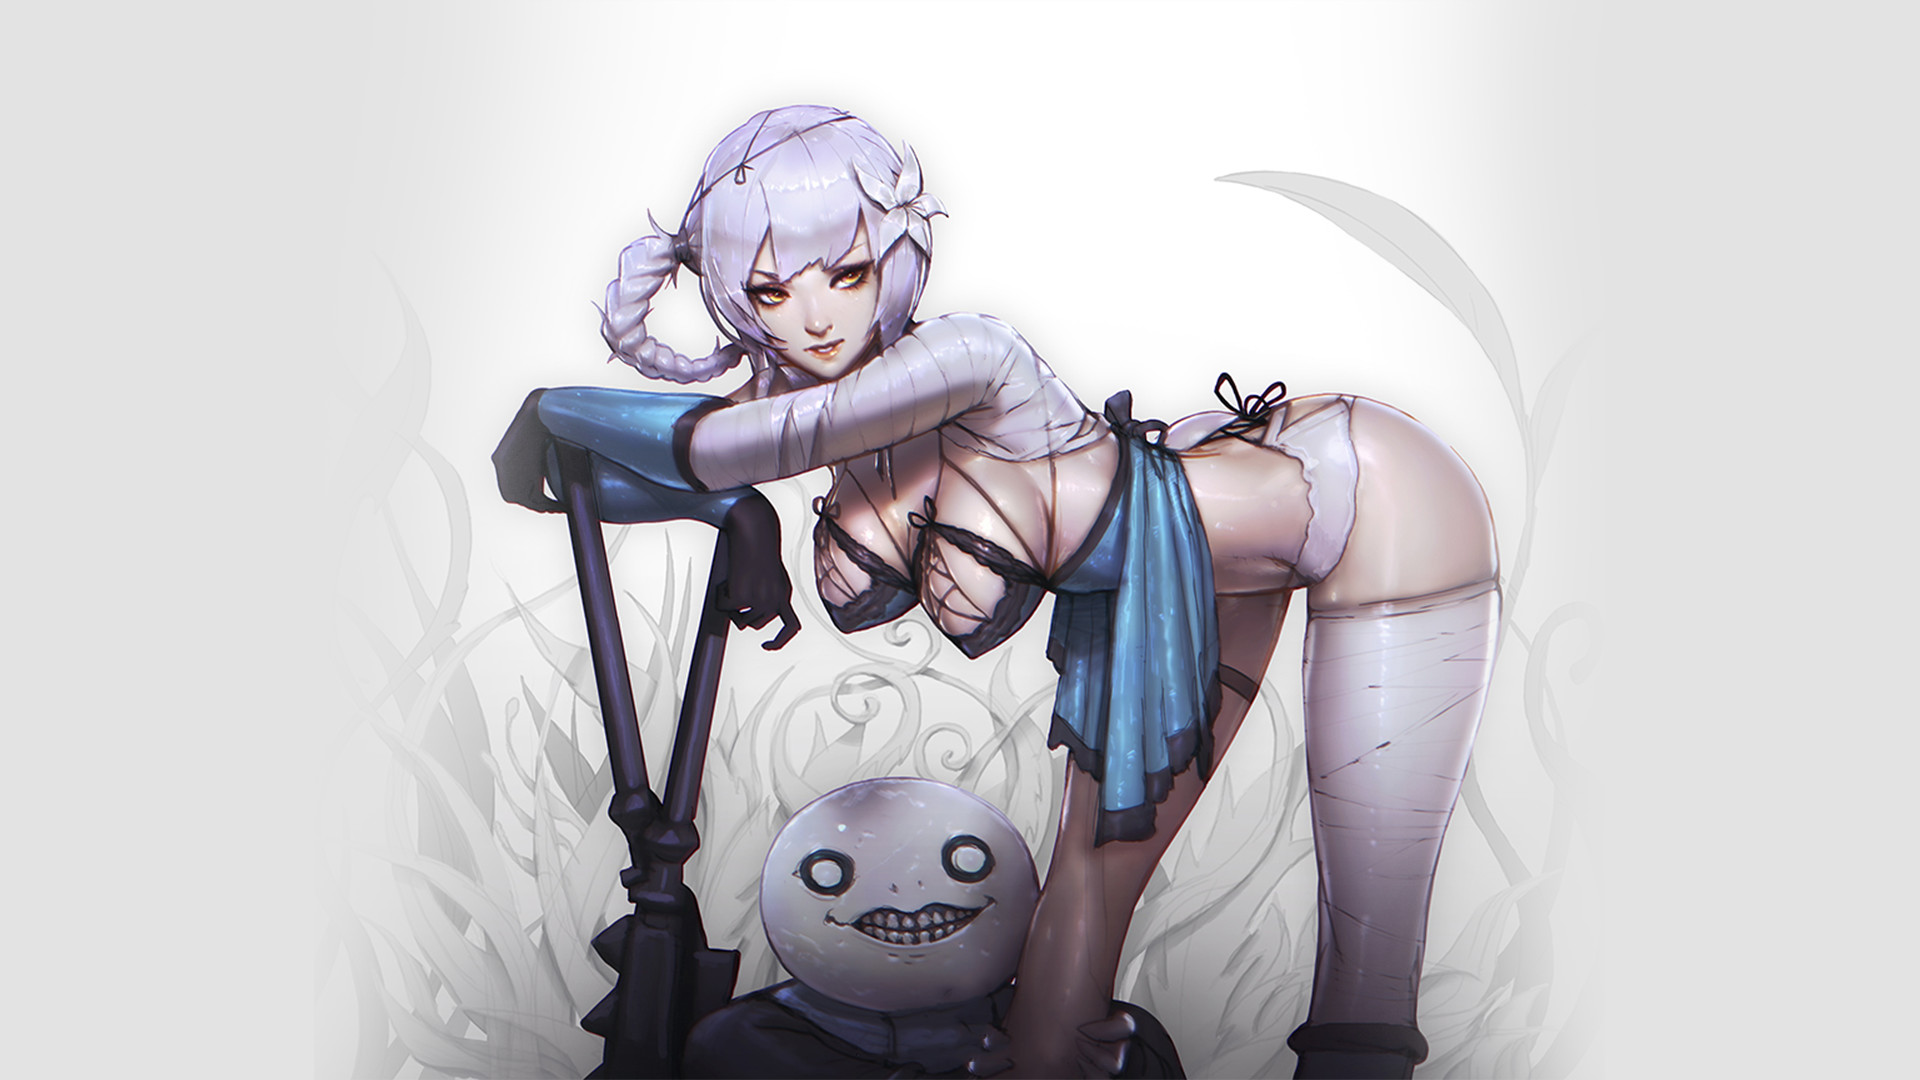 Kaine from Nier Replicant 1920 x 1080 1920x1080.